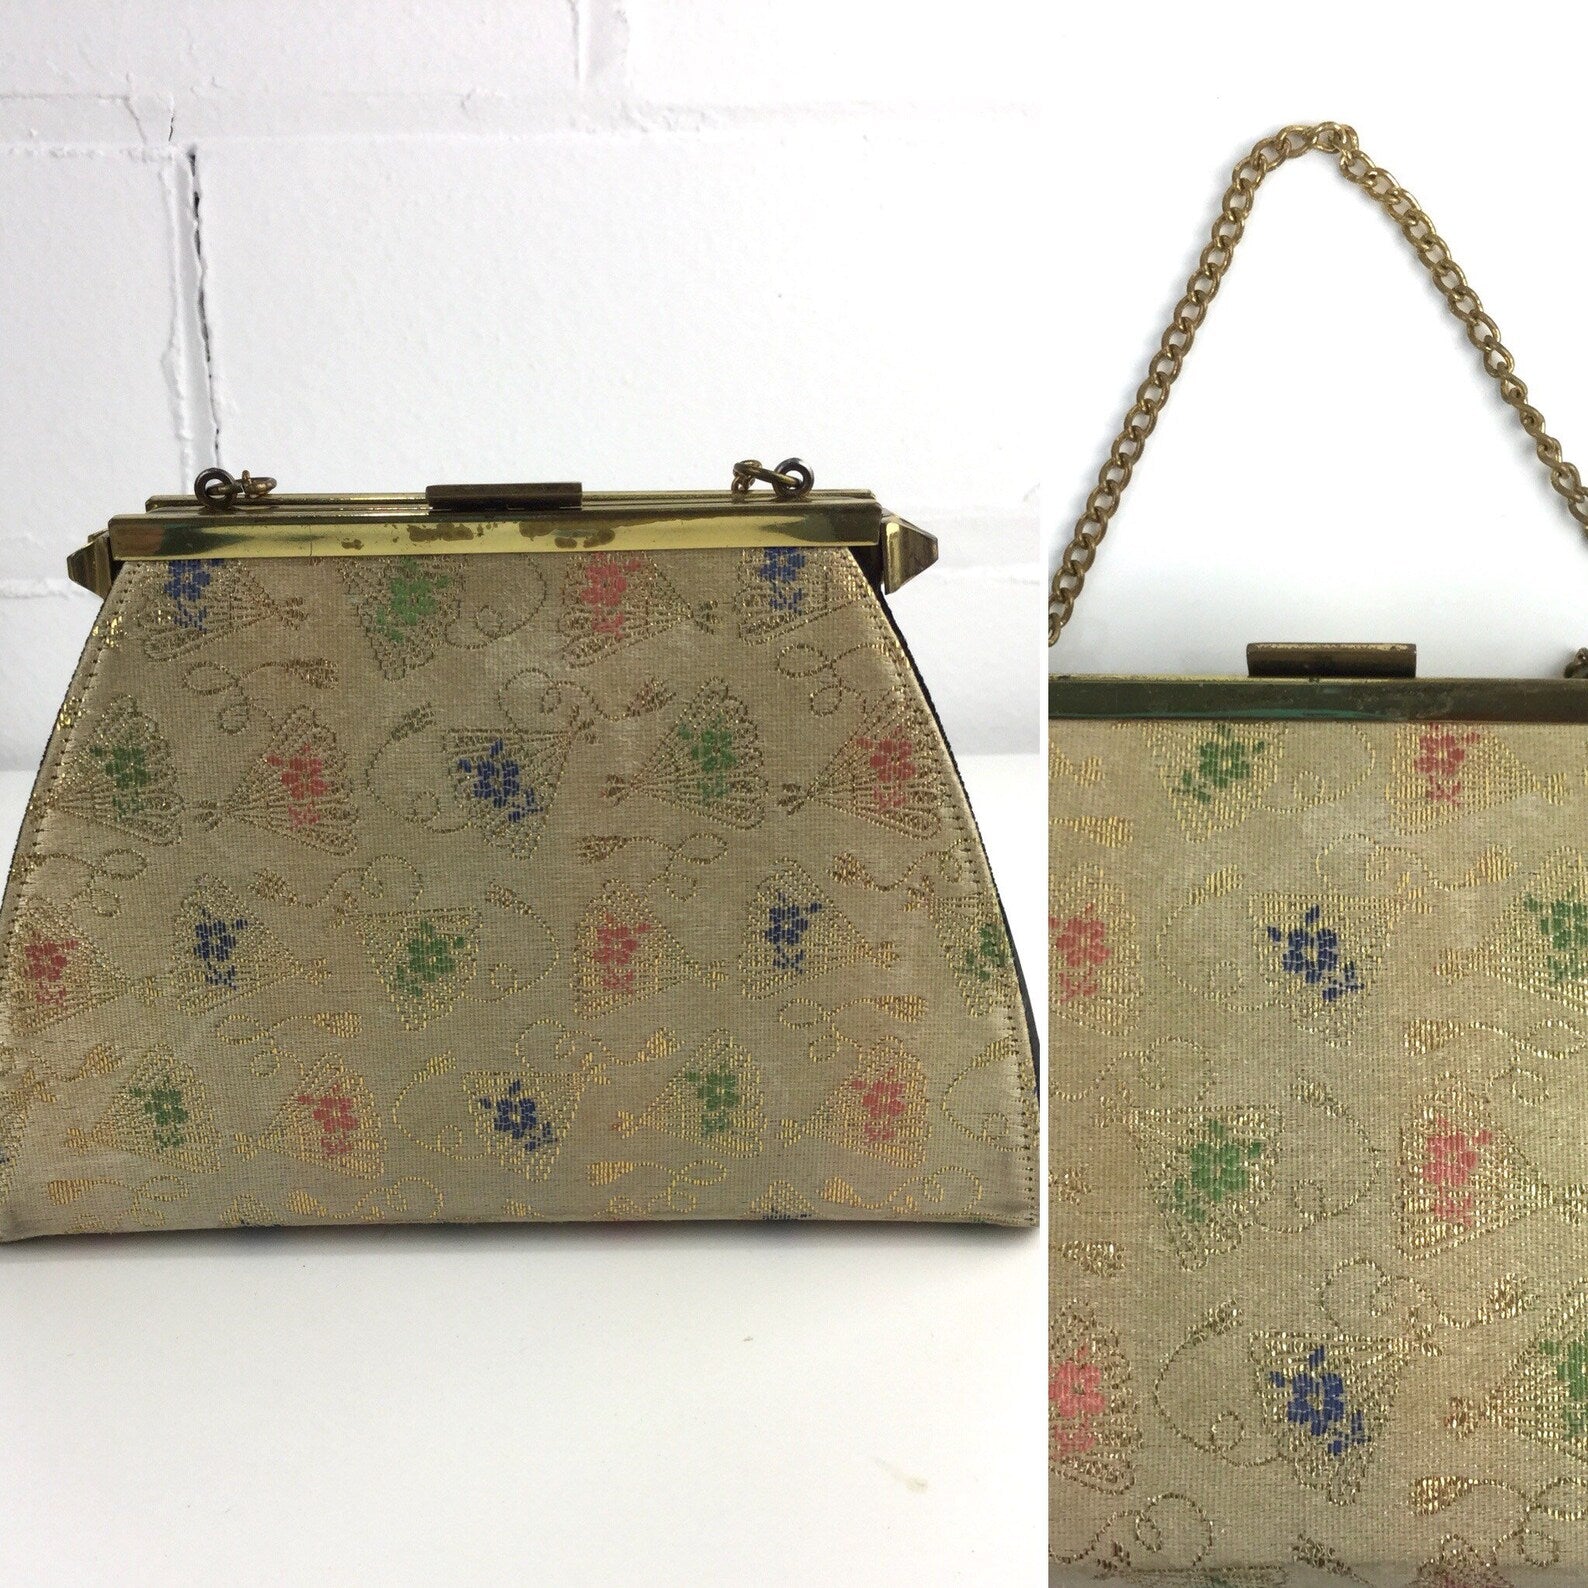 Sold at Auction: Soure Bags New York Floral Embroidered vintage purse bag